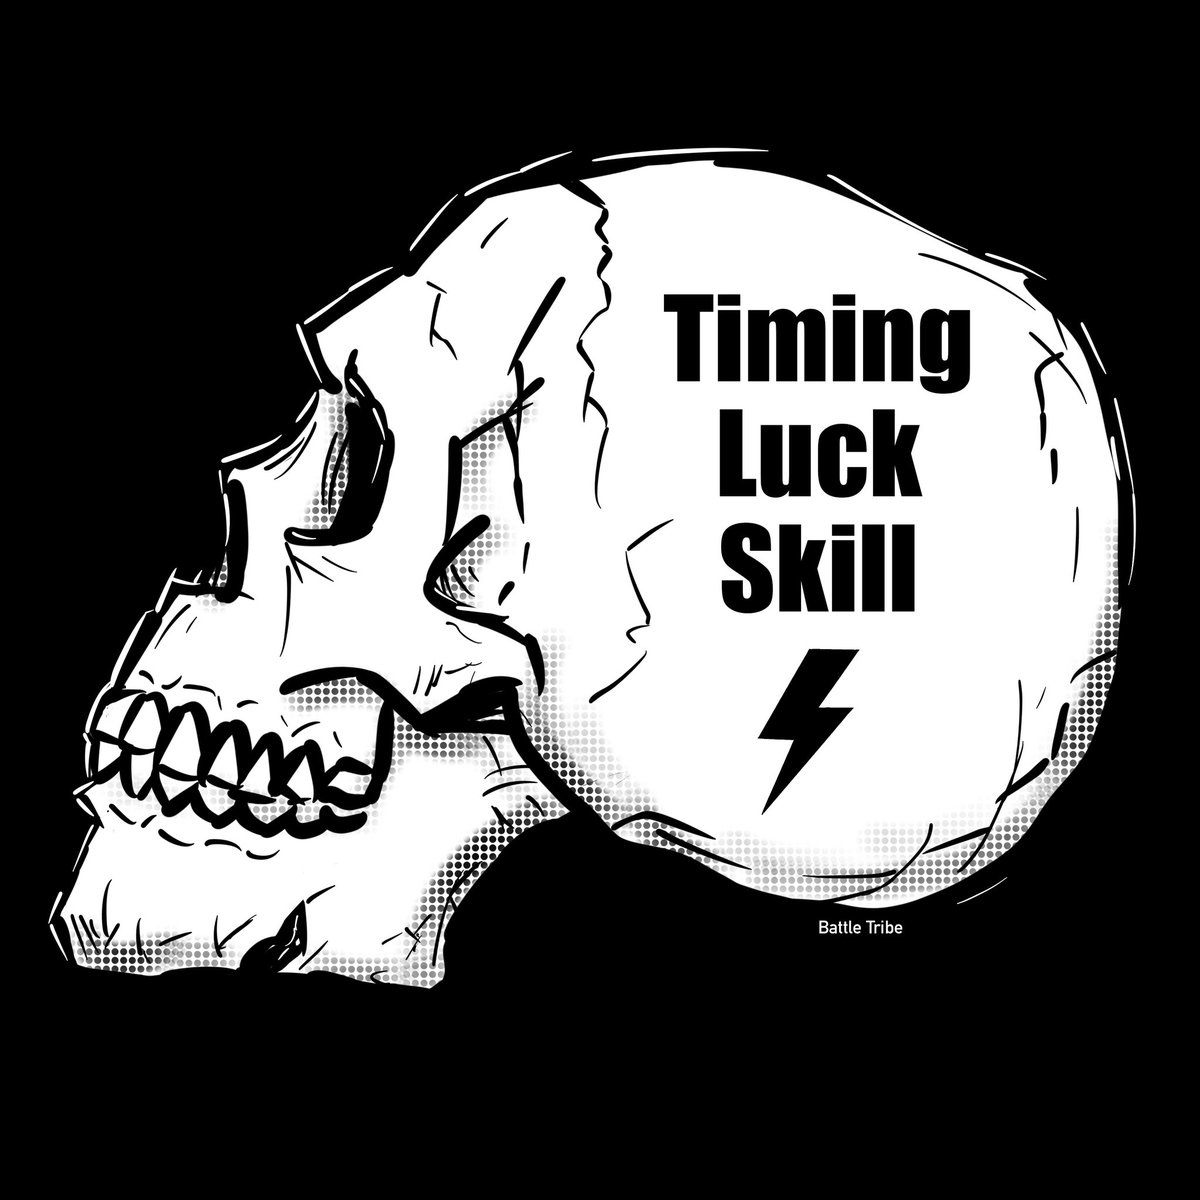 Timing, Luck, Skill ⚡️…a wise man once said. #Battletribe #art #skull